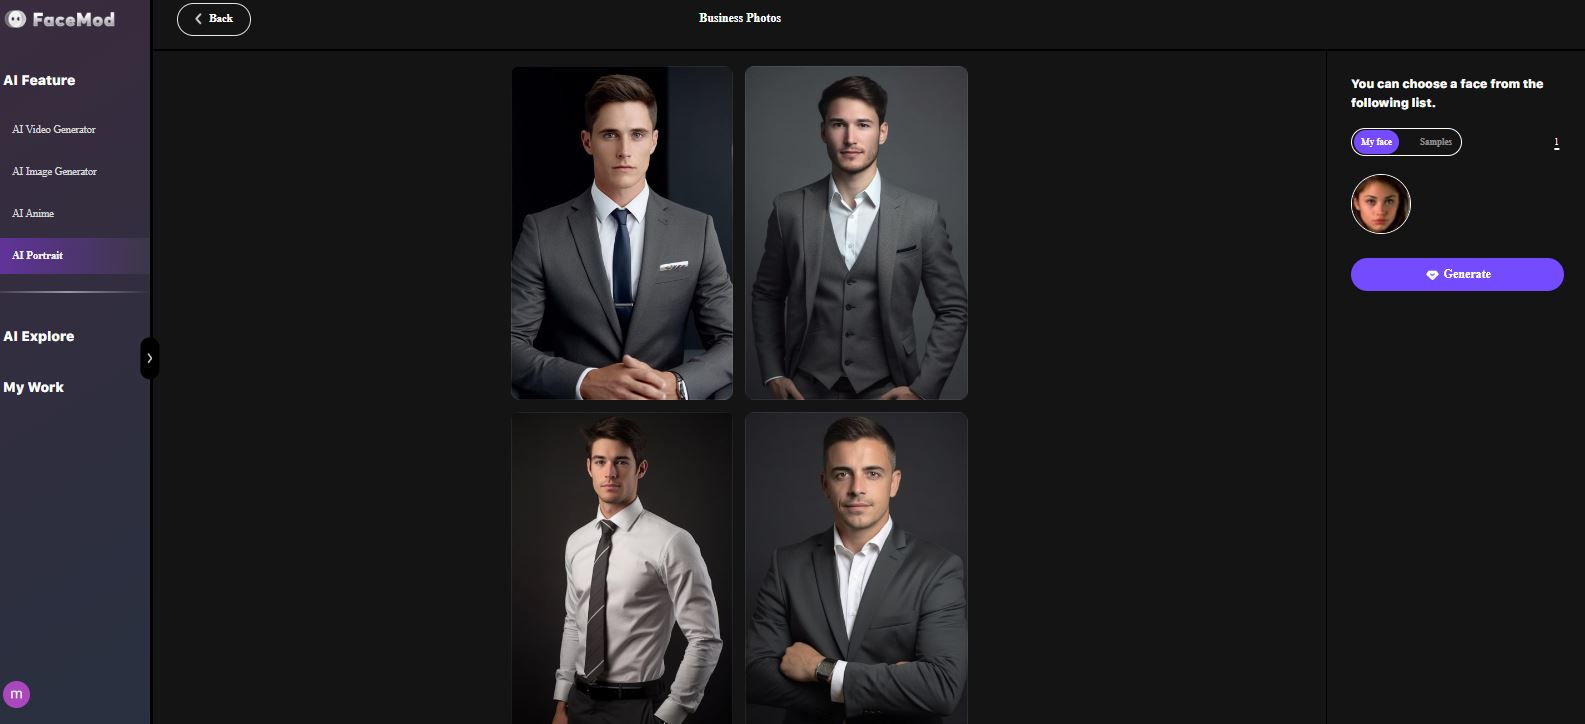 tips-how-to-make-your-company-profile-picture-look-professional-3.JPG